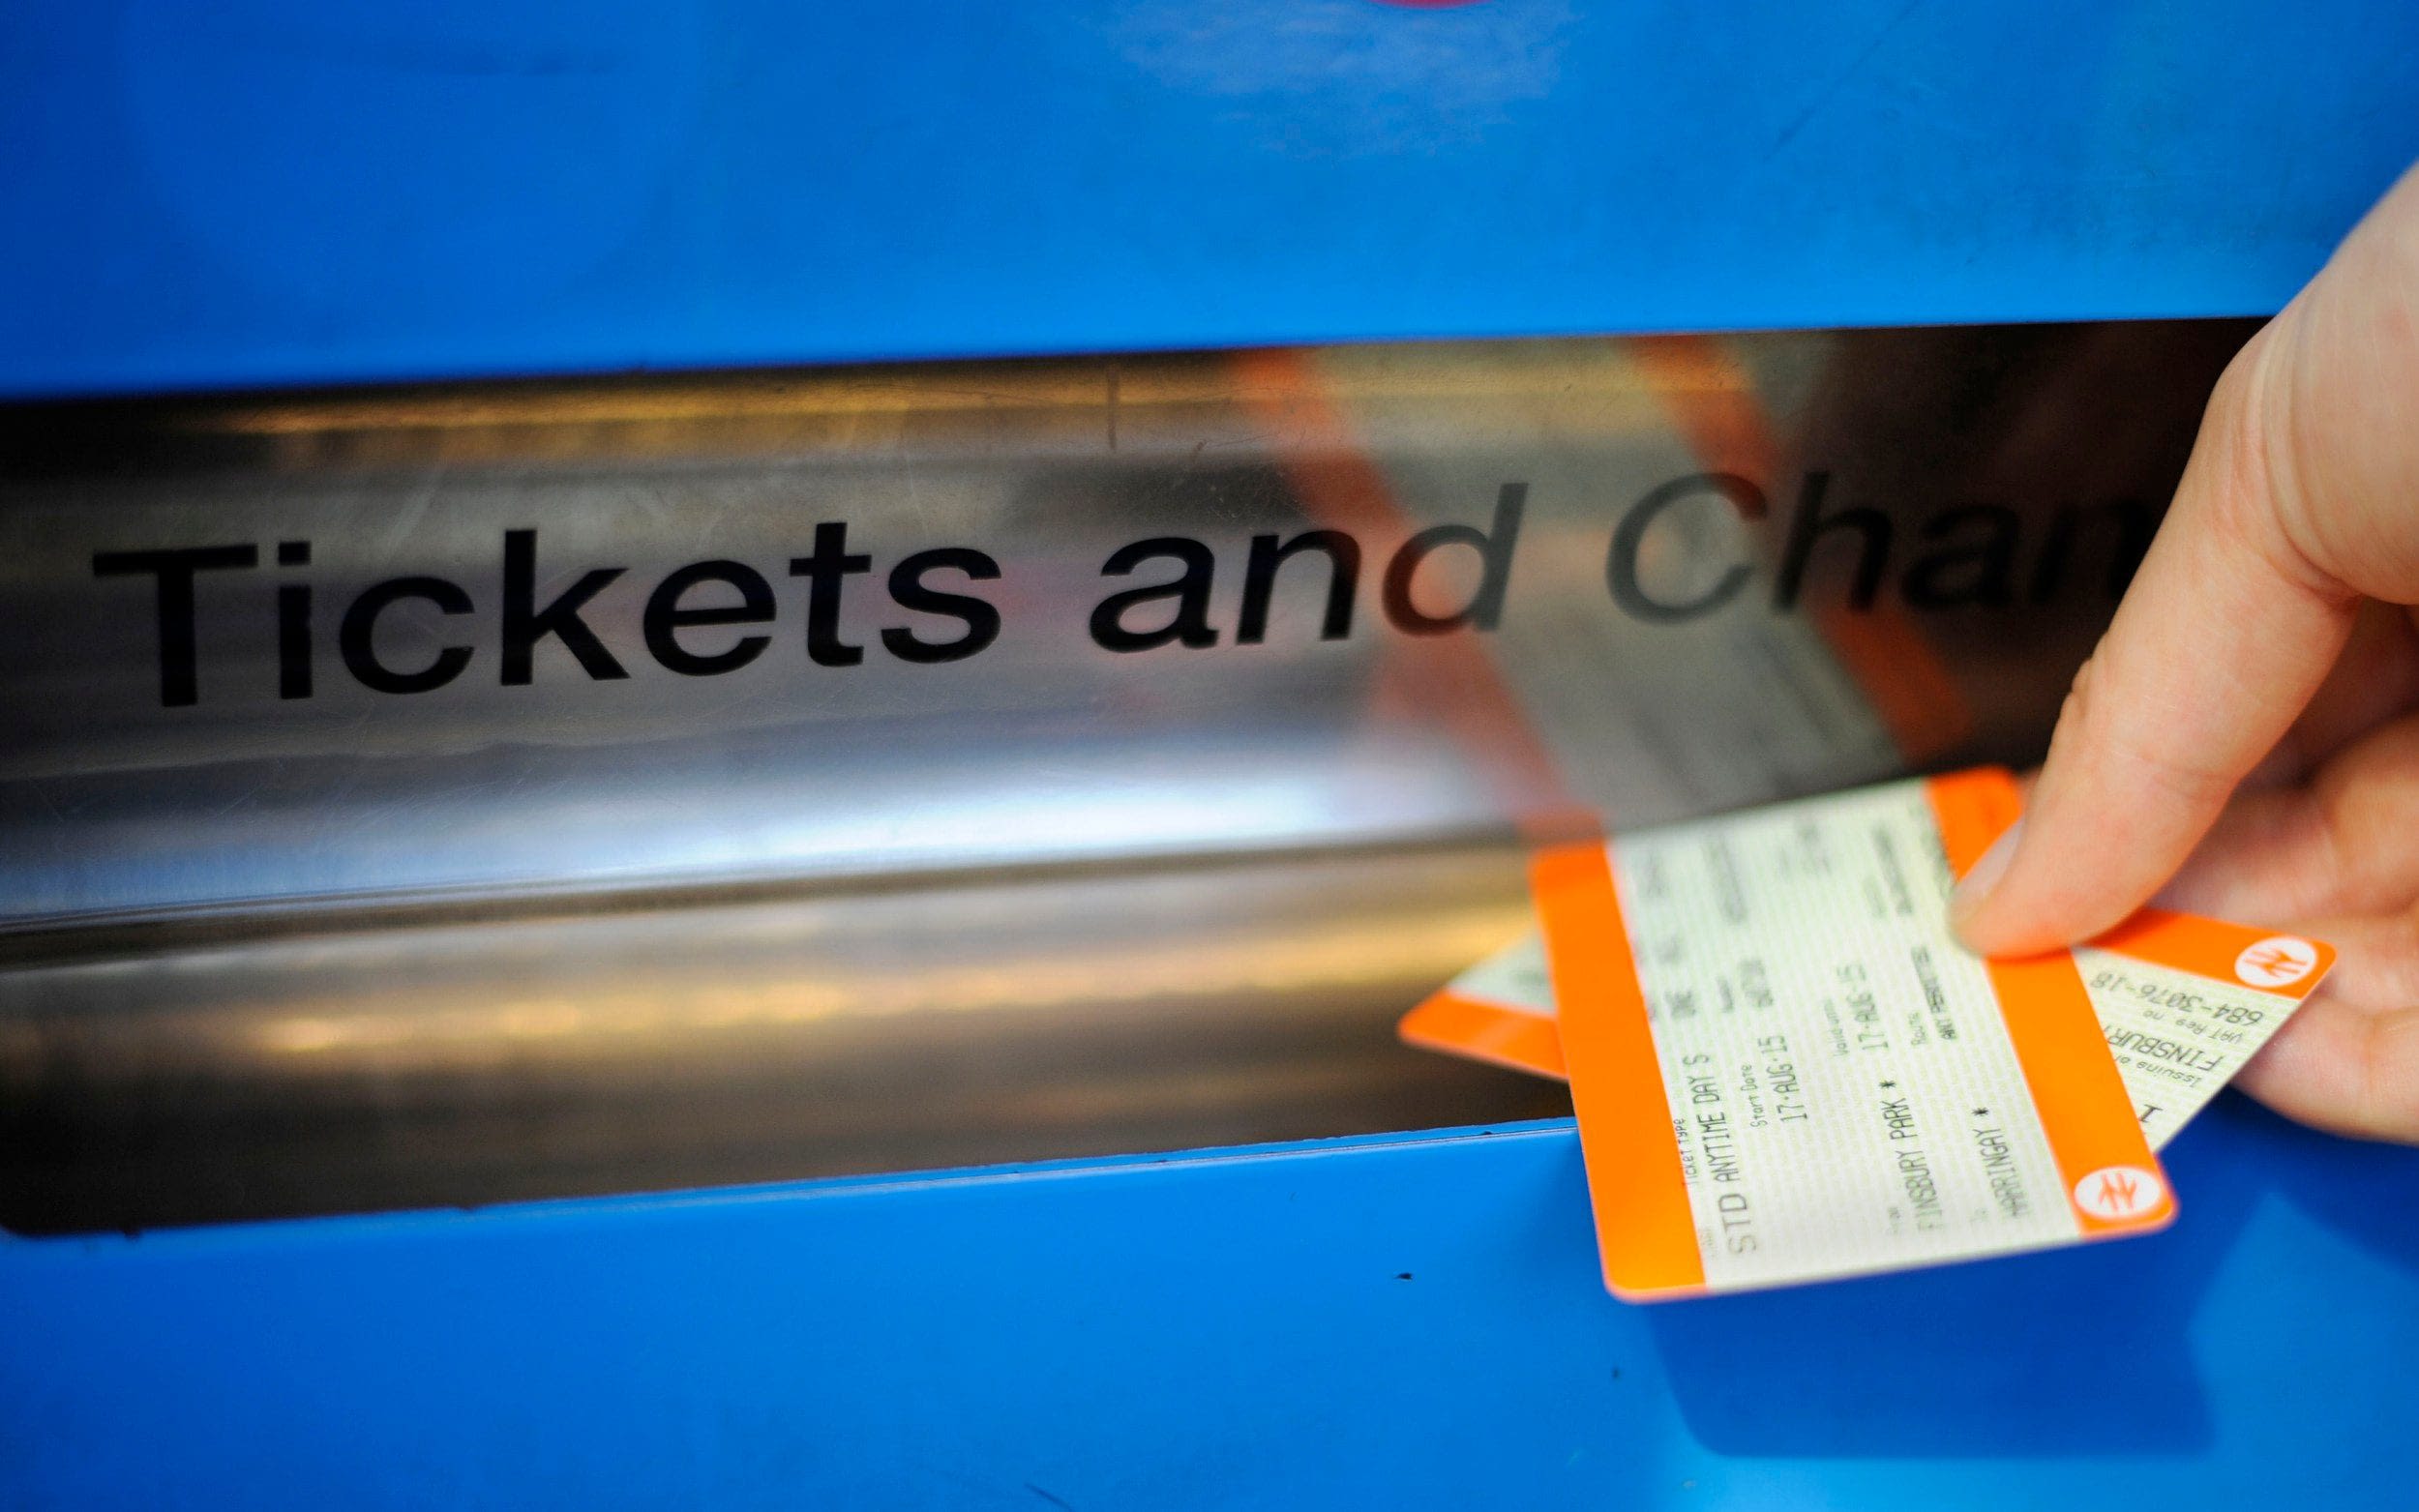 The rail pass scheme that gives you the most bang for your buck